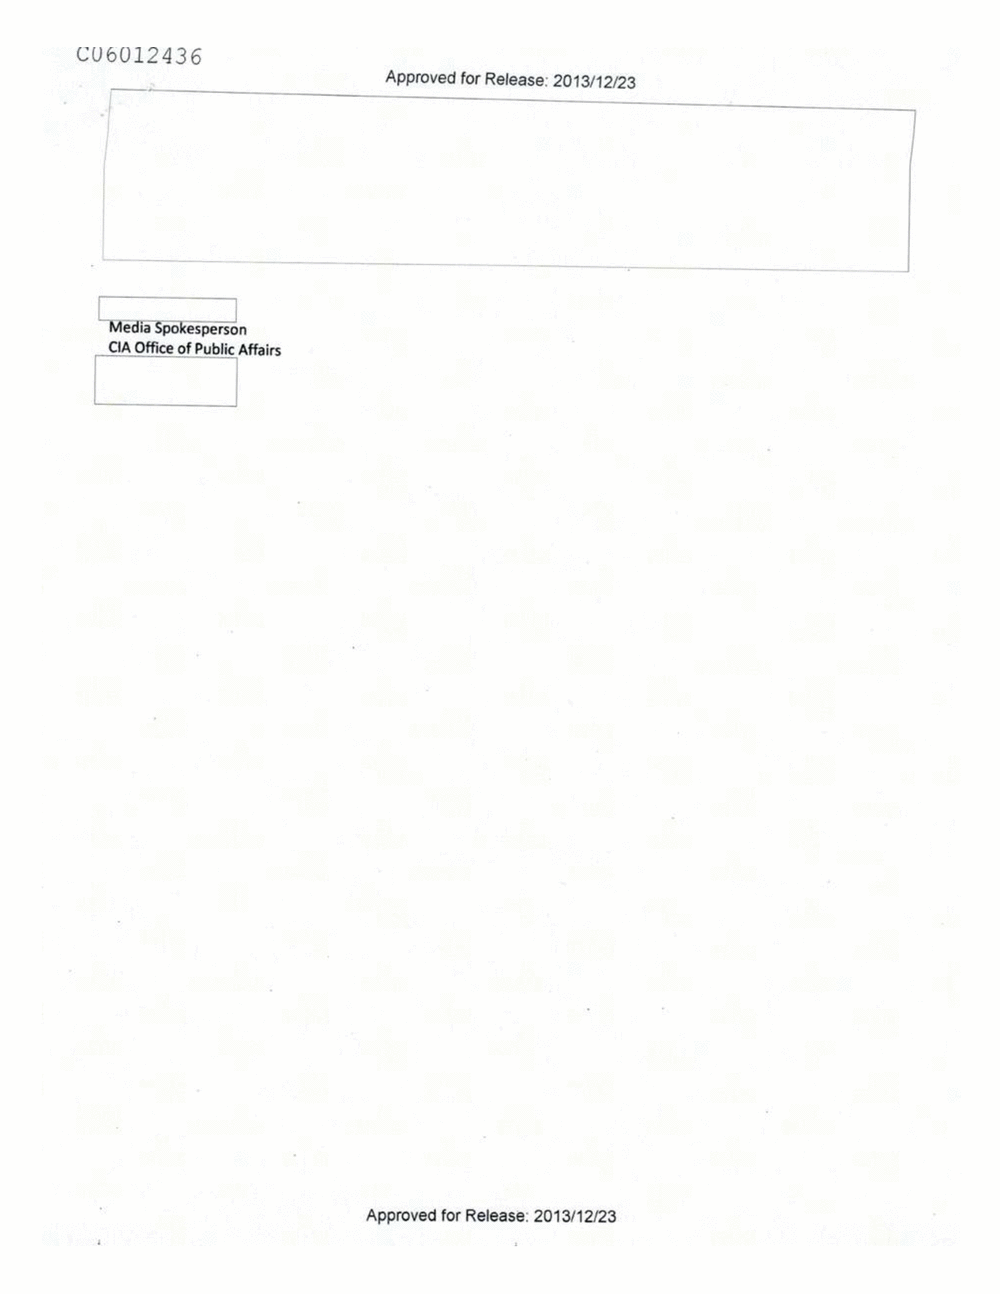 Page 17 from Email Correspondence Between Reporters and CIA Flacks